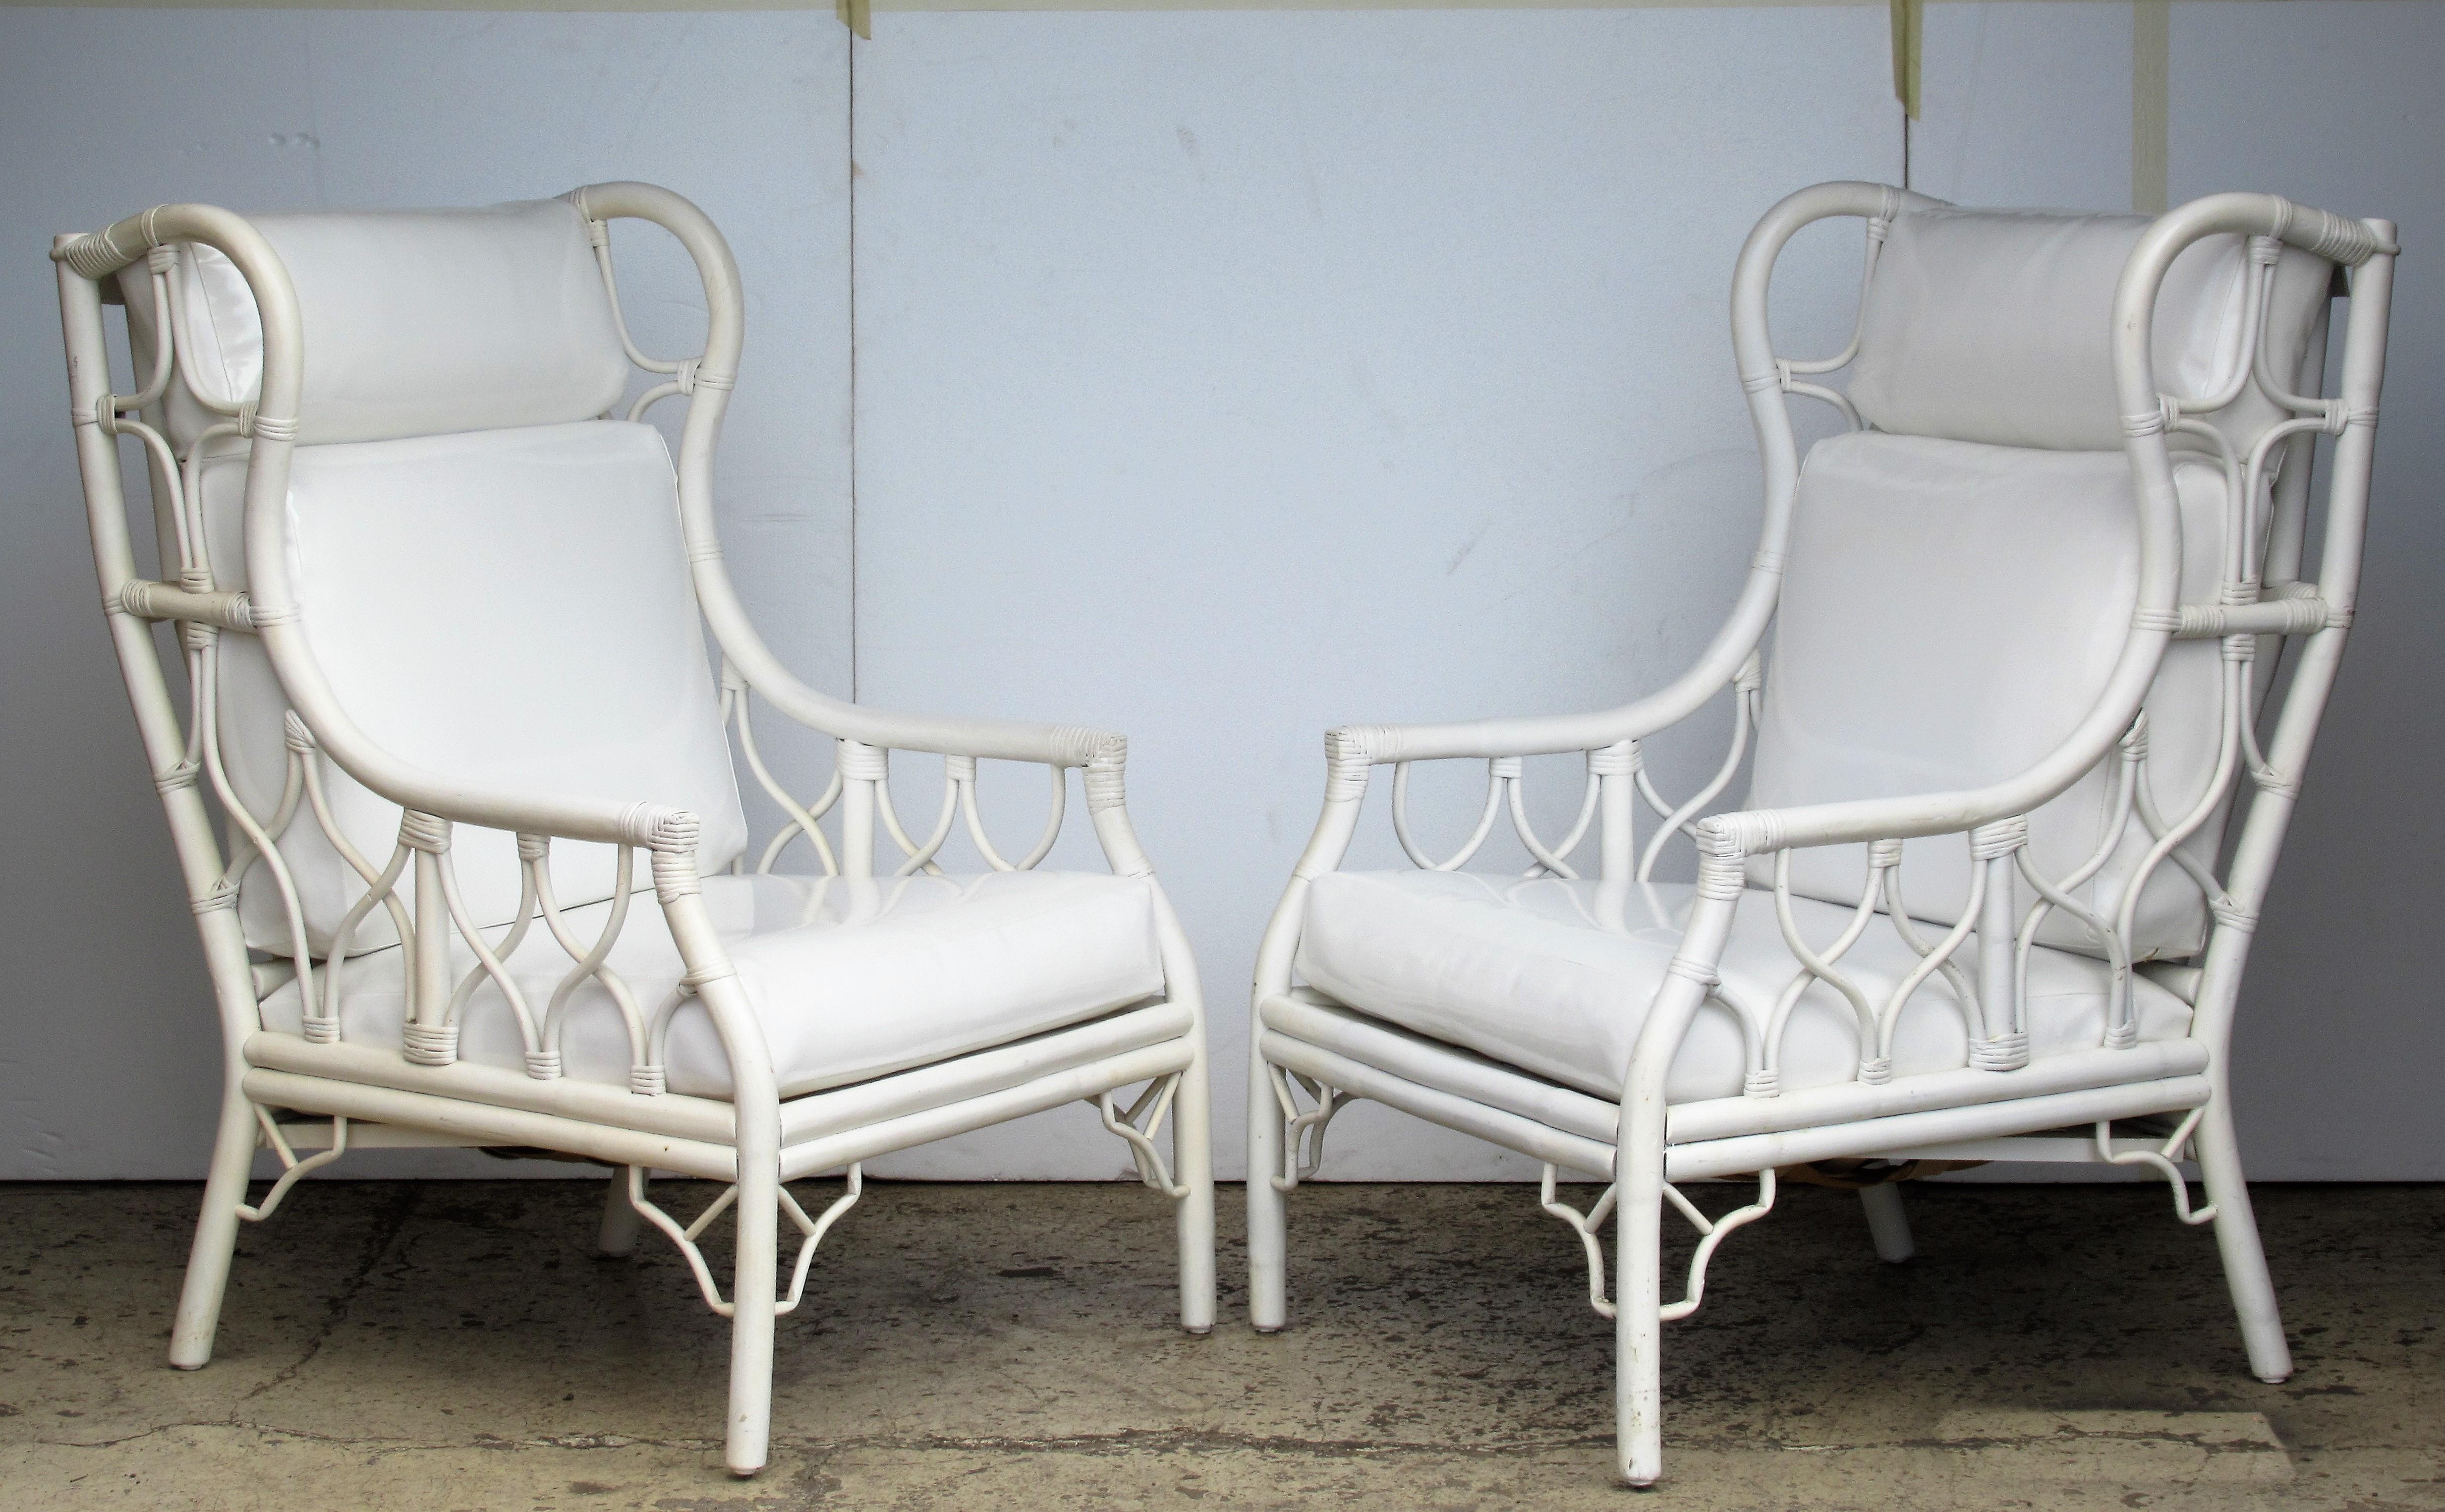 A very glamorous large scale pair of rattan Hollywood Regency / Chinese Chippendale style wing back chairs in white enamel painted finish and beautifully upholstered faux white patent leather seat and back cushions, circa 1960 - 1970. These are